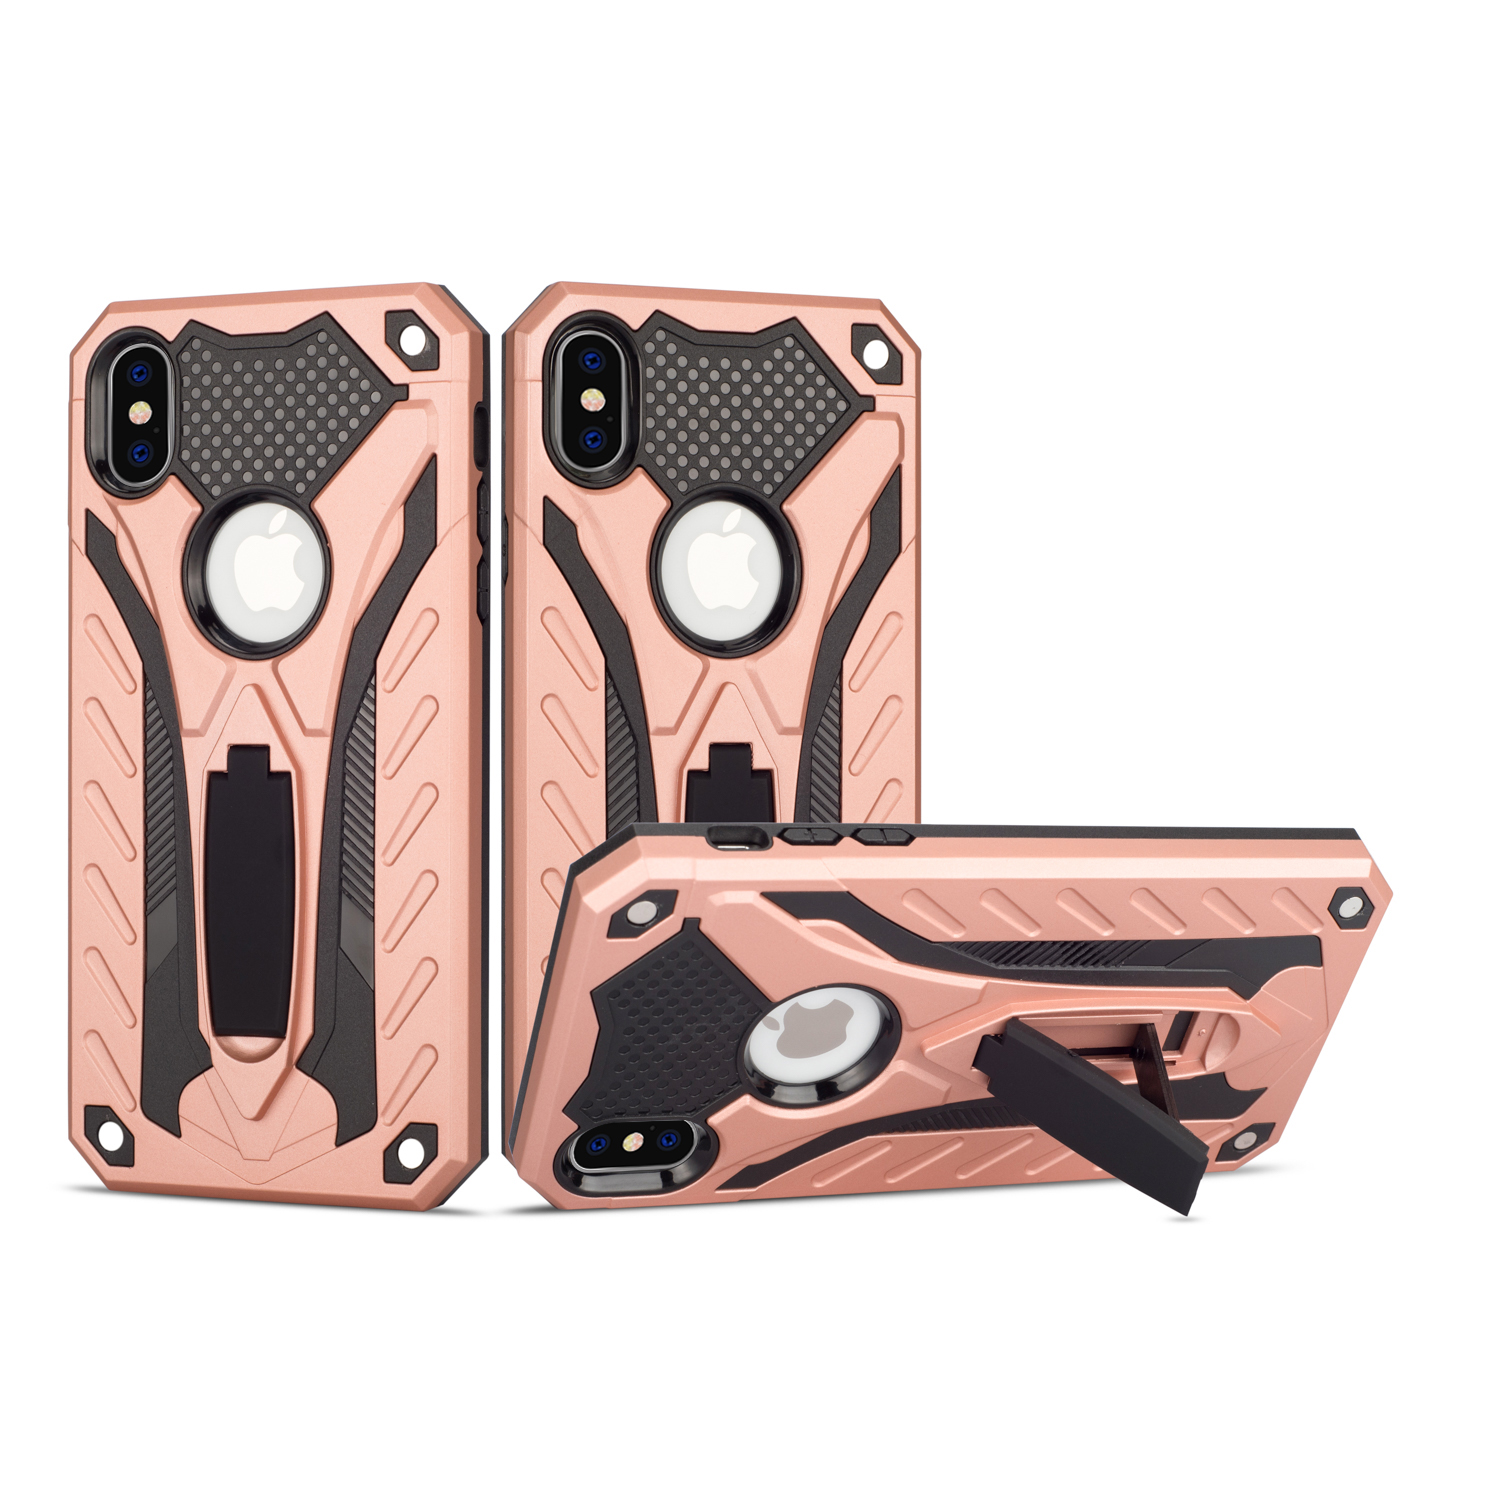 iPHONE Xs Max Armor Knight Kickstand Hybrid Case (Rose Gold)